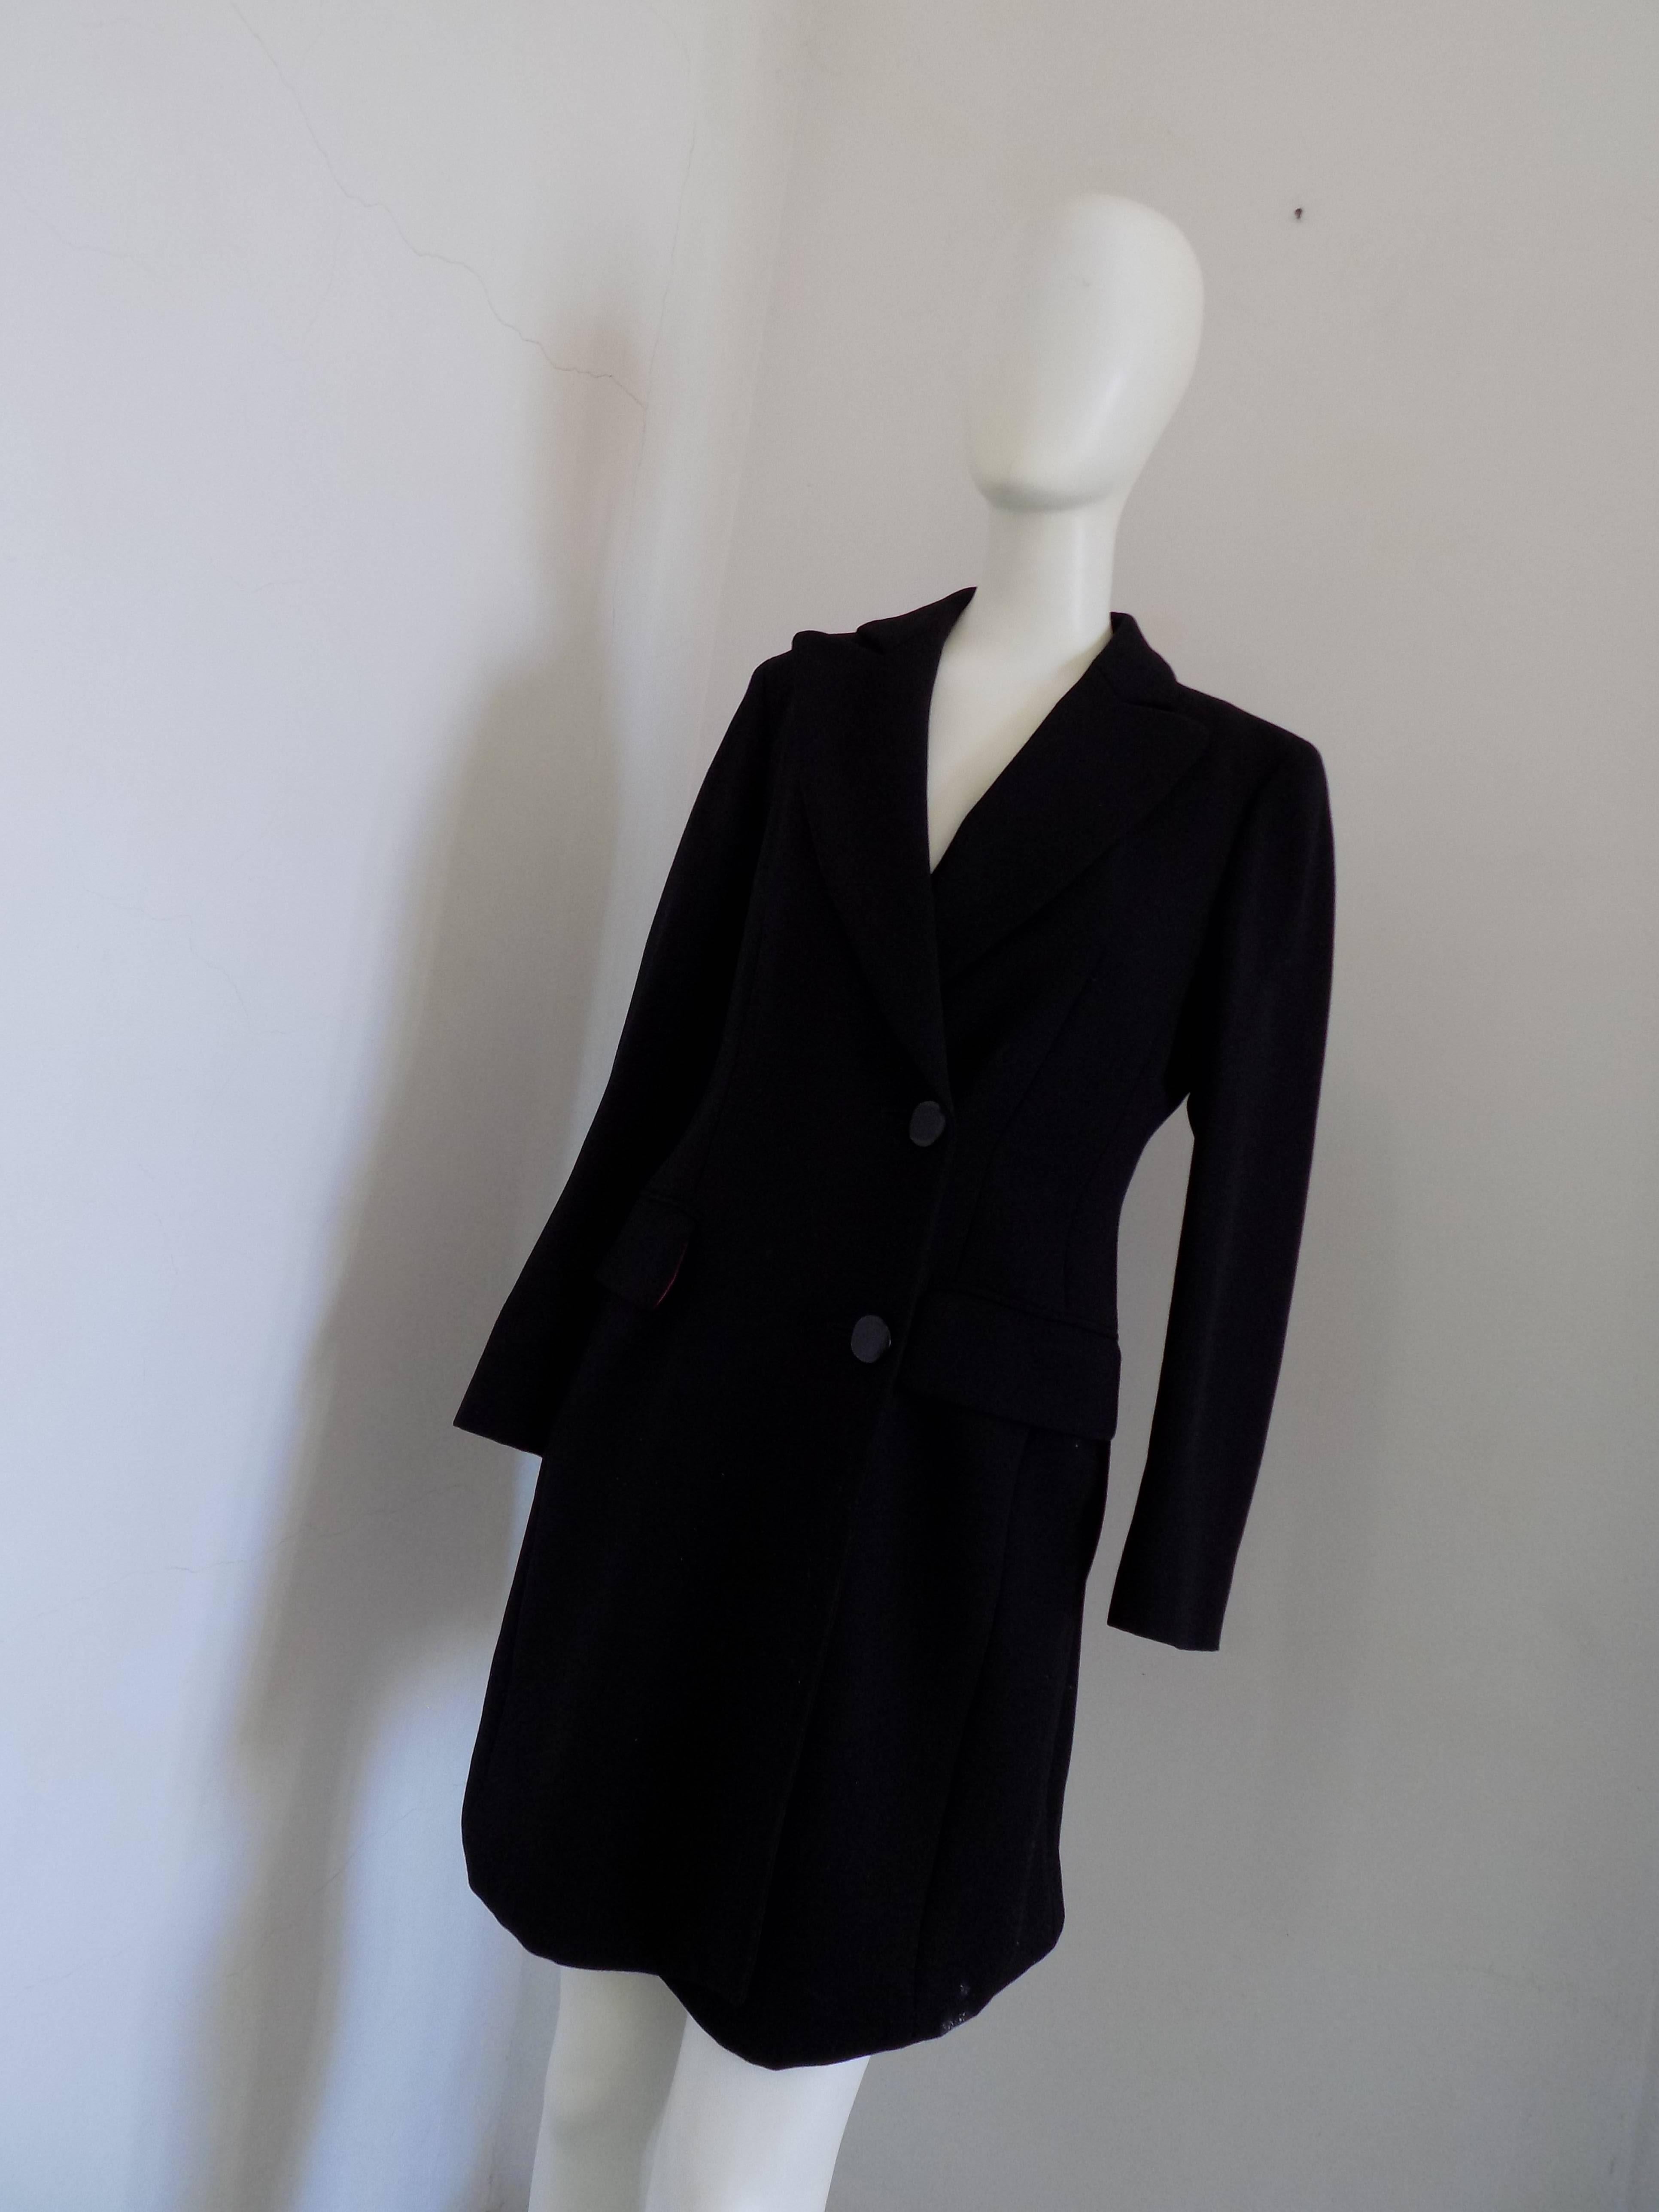 Moschino Black long jacket
Totally made in italy in italian size range 42
composition: wool